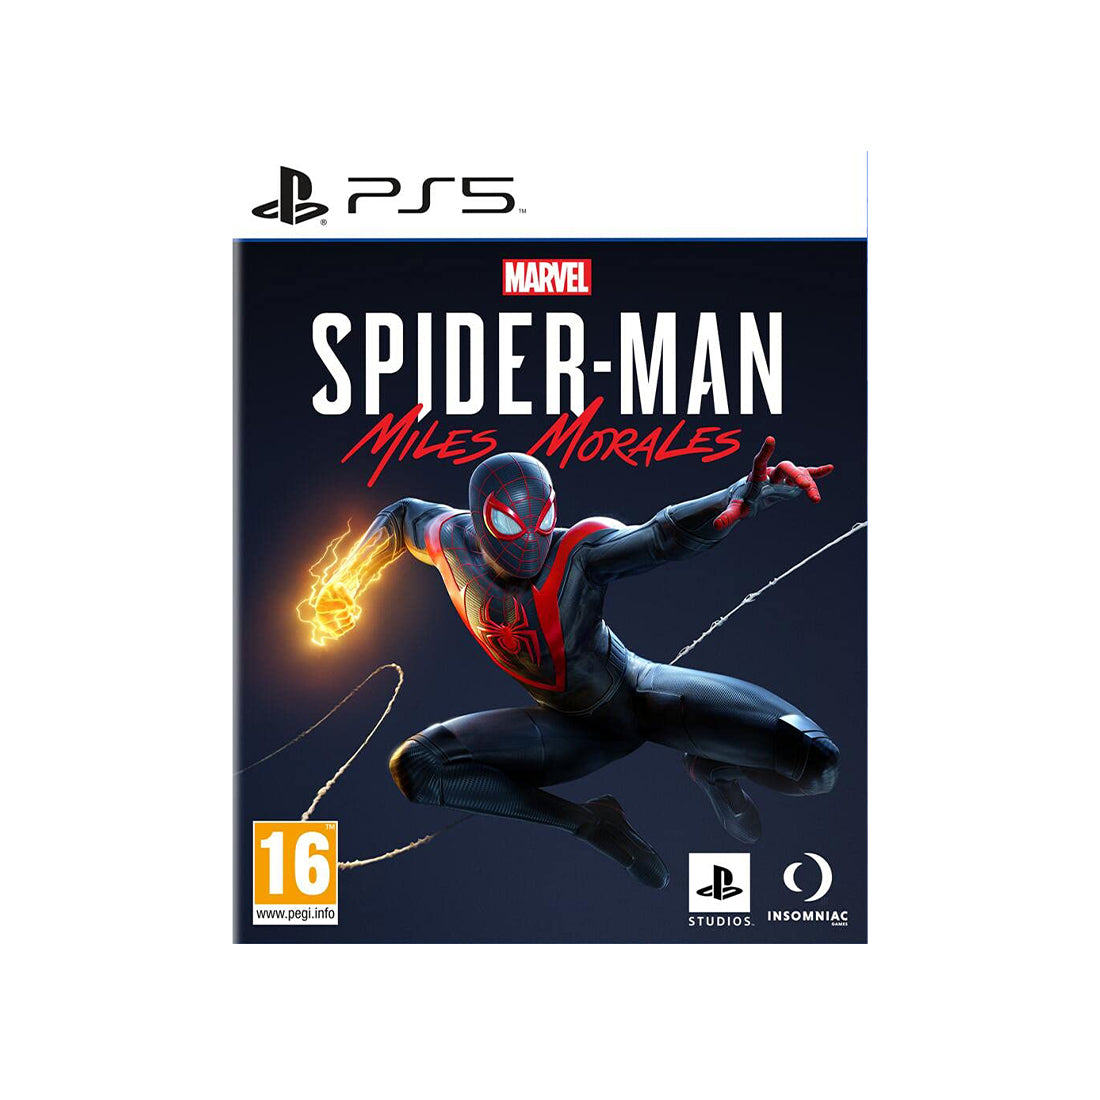 Demon's Souls and Spider-Man Miles Morales will be PS5 launch